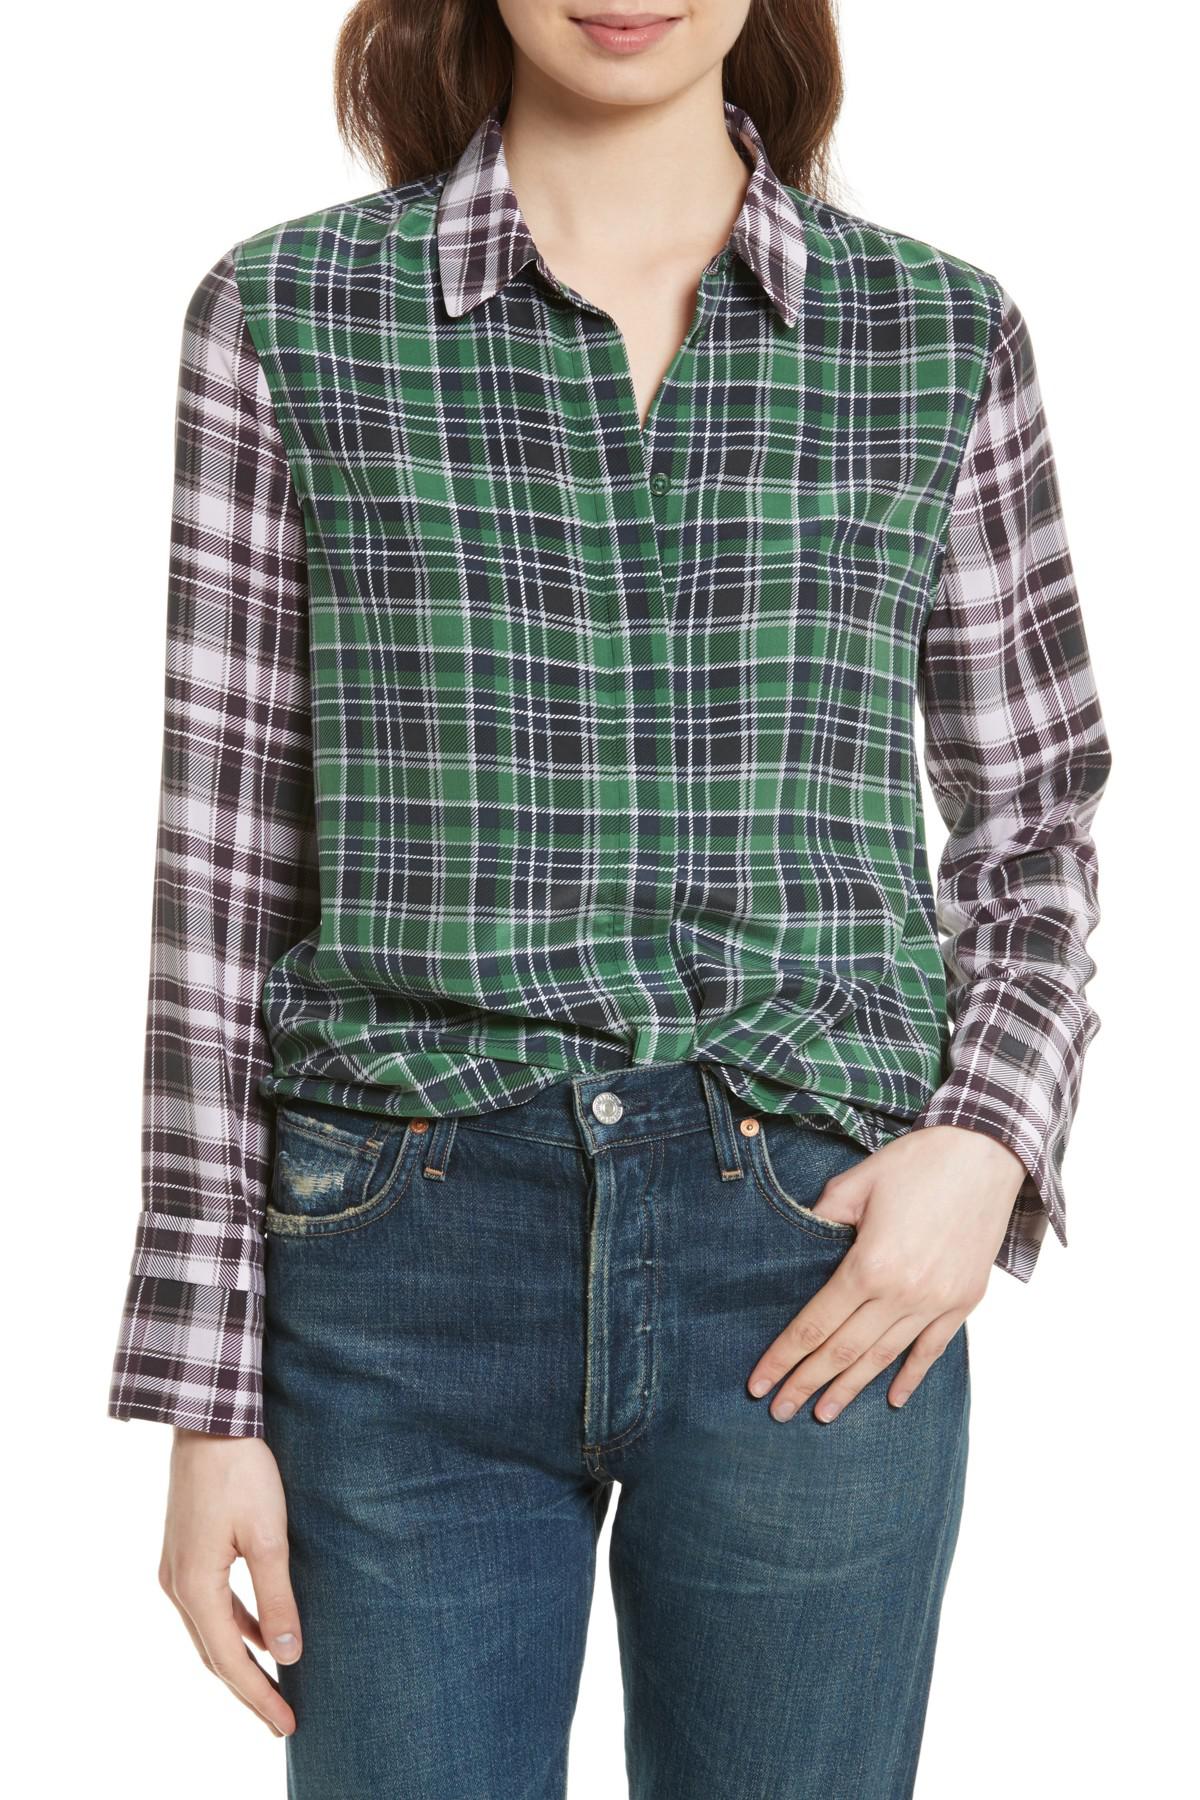 Equipment Holly Colorblock Plaid Silk Shirt in Green - Lyst